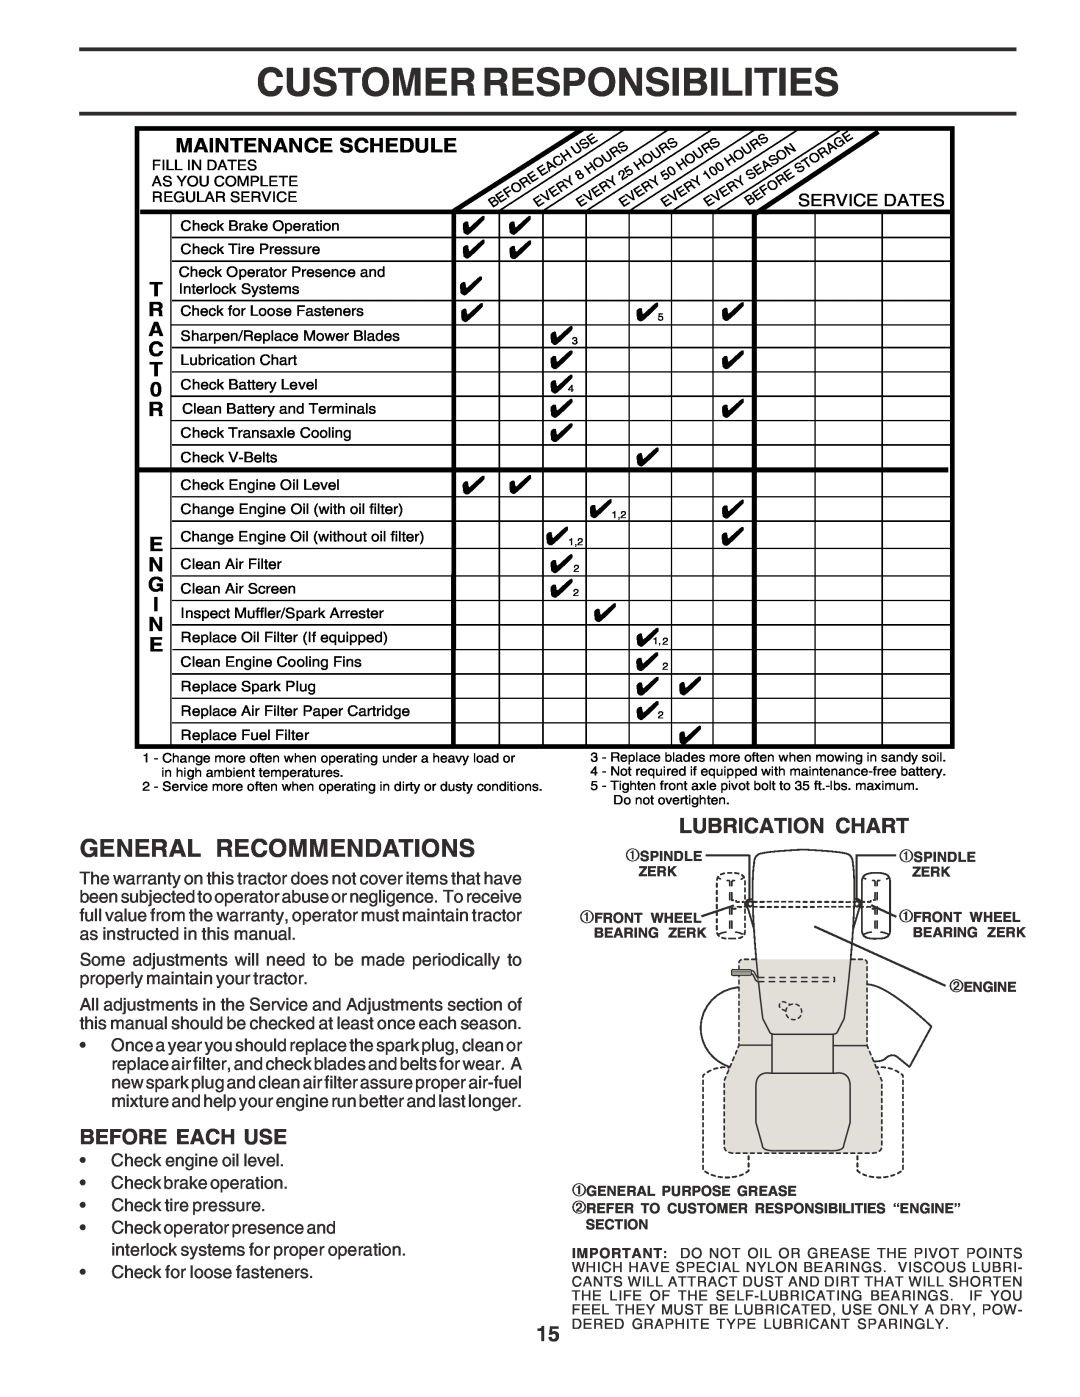 Poulan 183041 owner manual Customer Responsibilities, General Recommendations, Lubrication Chart, Before Each Use 